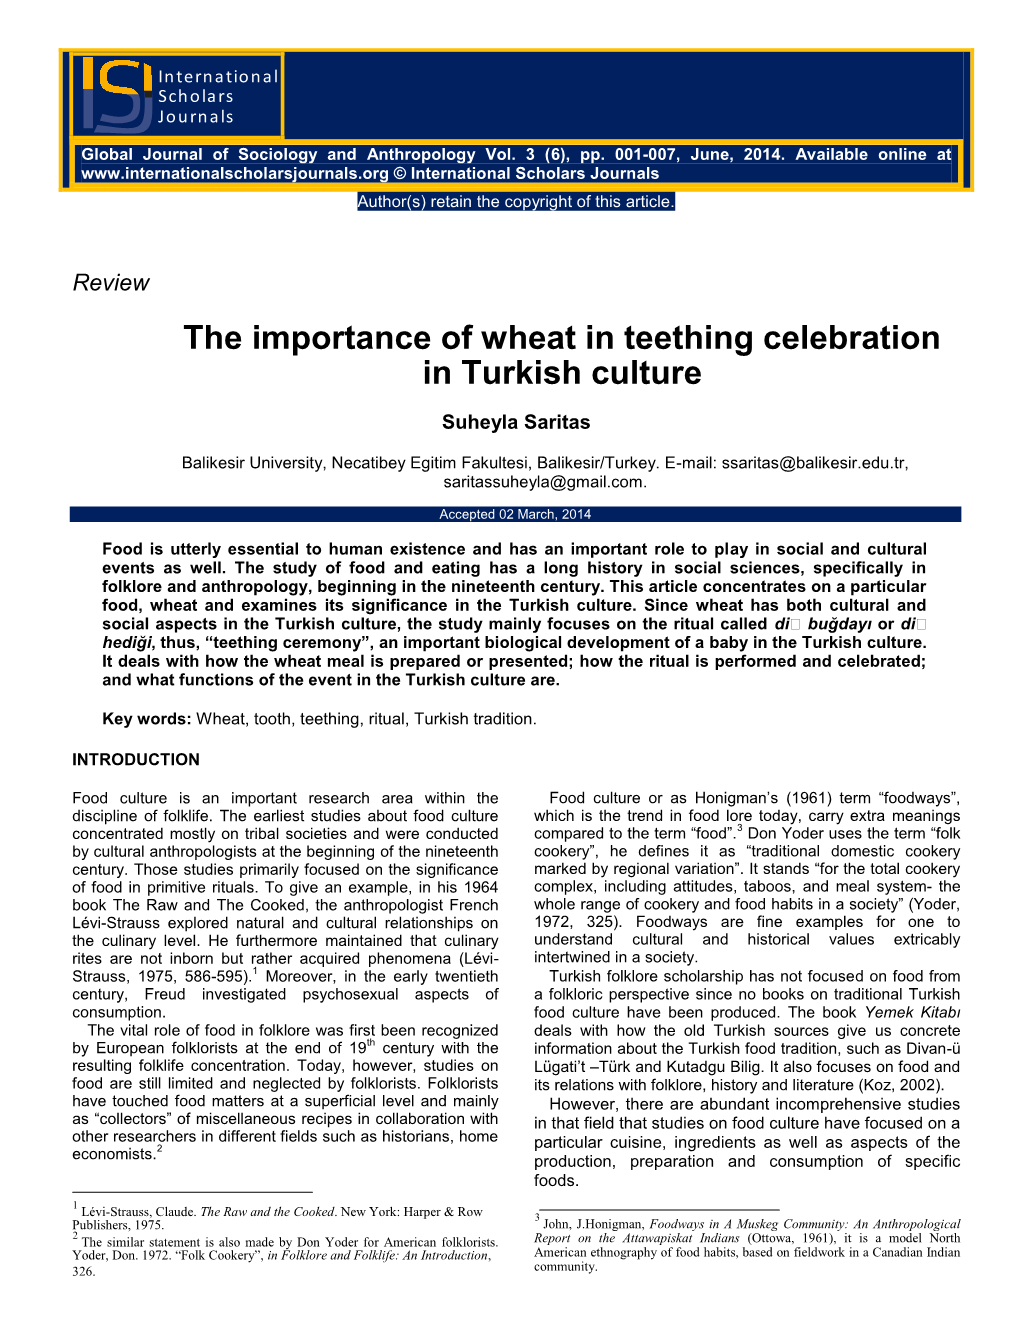 The Importance of Wheat in Teething Celebration in Turkish Culture